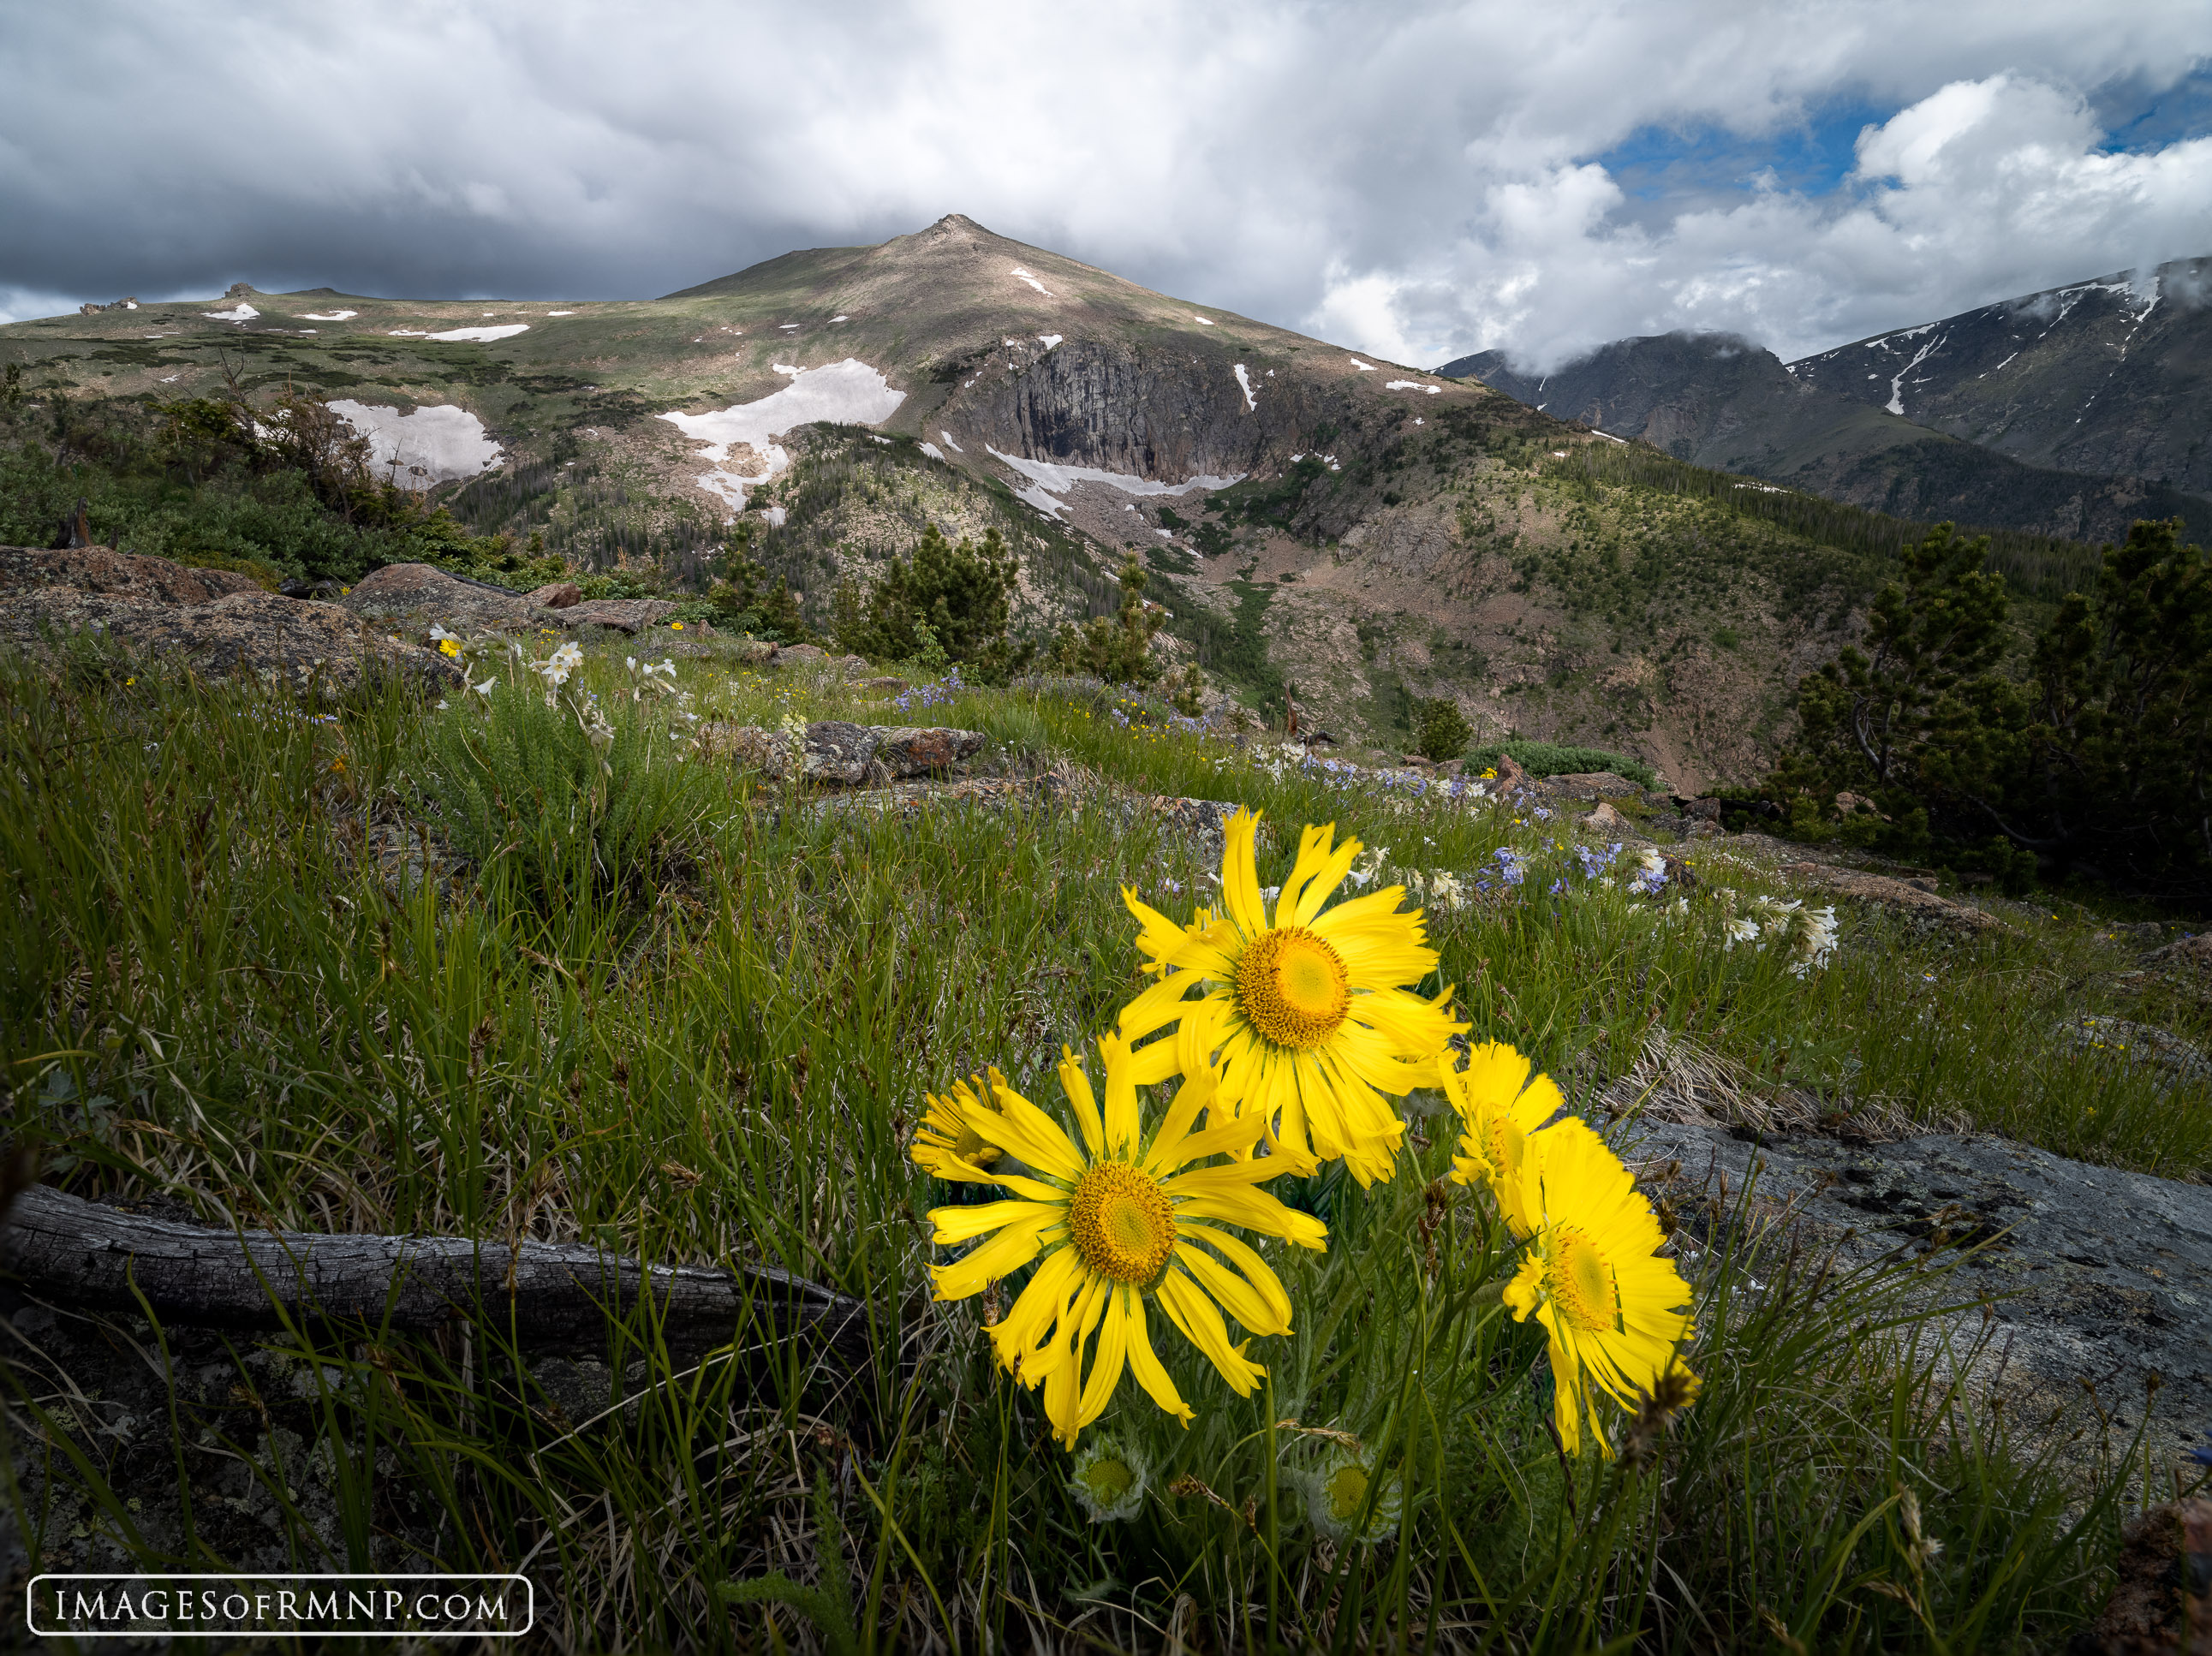 On a summer's day in the higher regions of Rocky Mountain National Park, the alpine sunflowers seem to smile as they wave in...